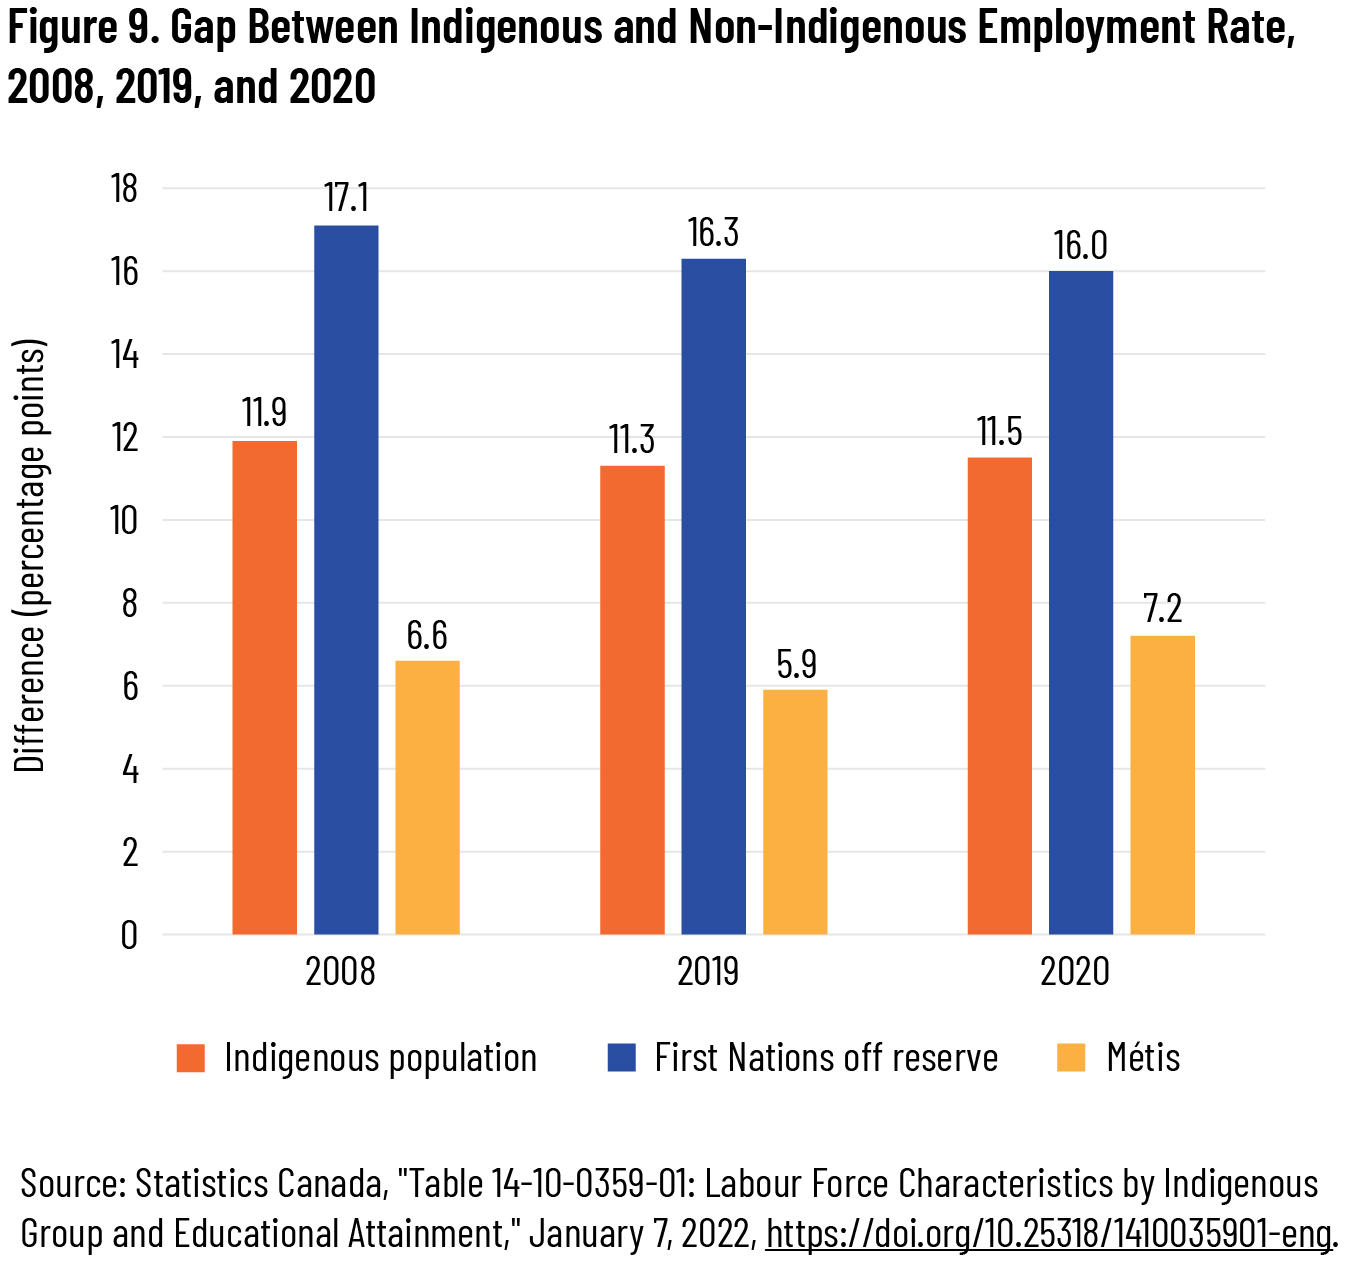 Figure 9. Gap Between Indigenous and Non-Indigenous Employment Rate, 2008, 2019, and 2020